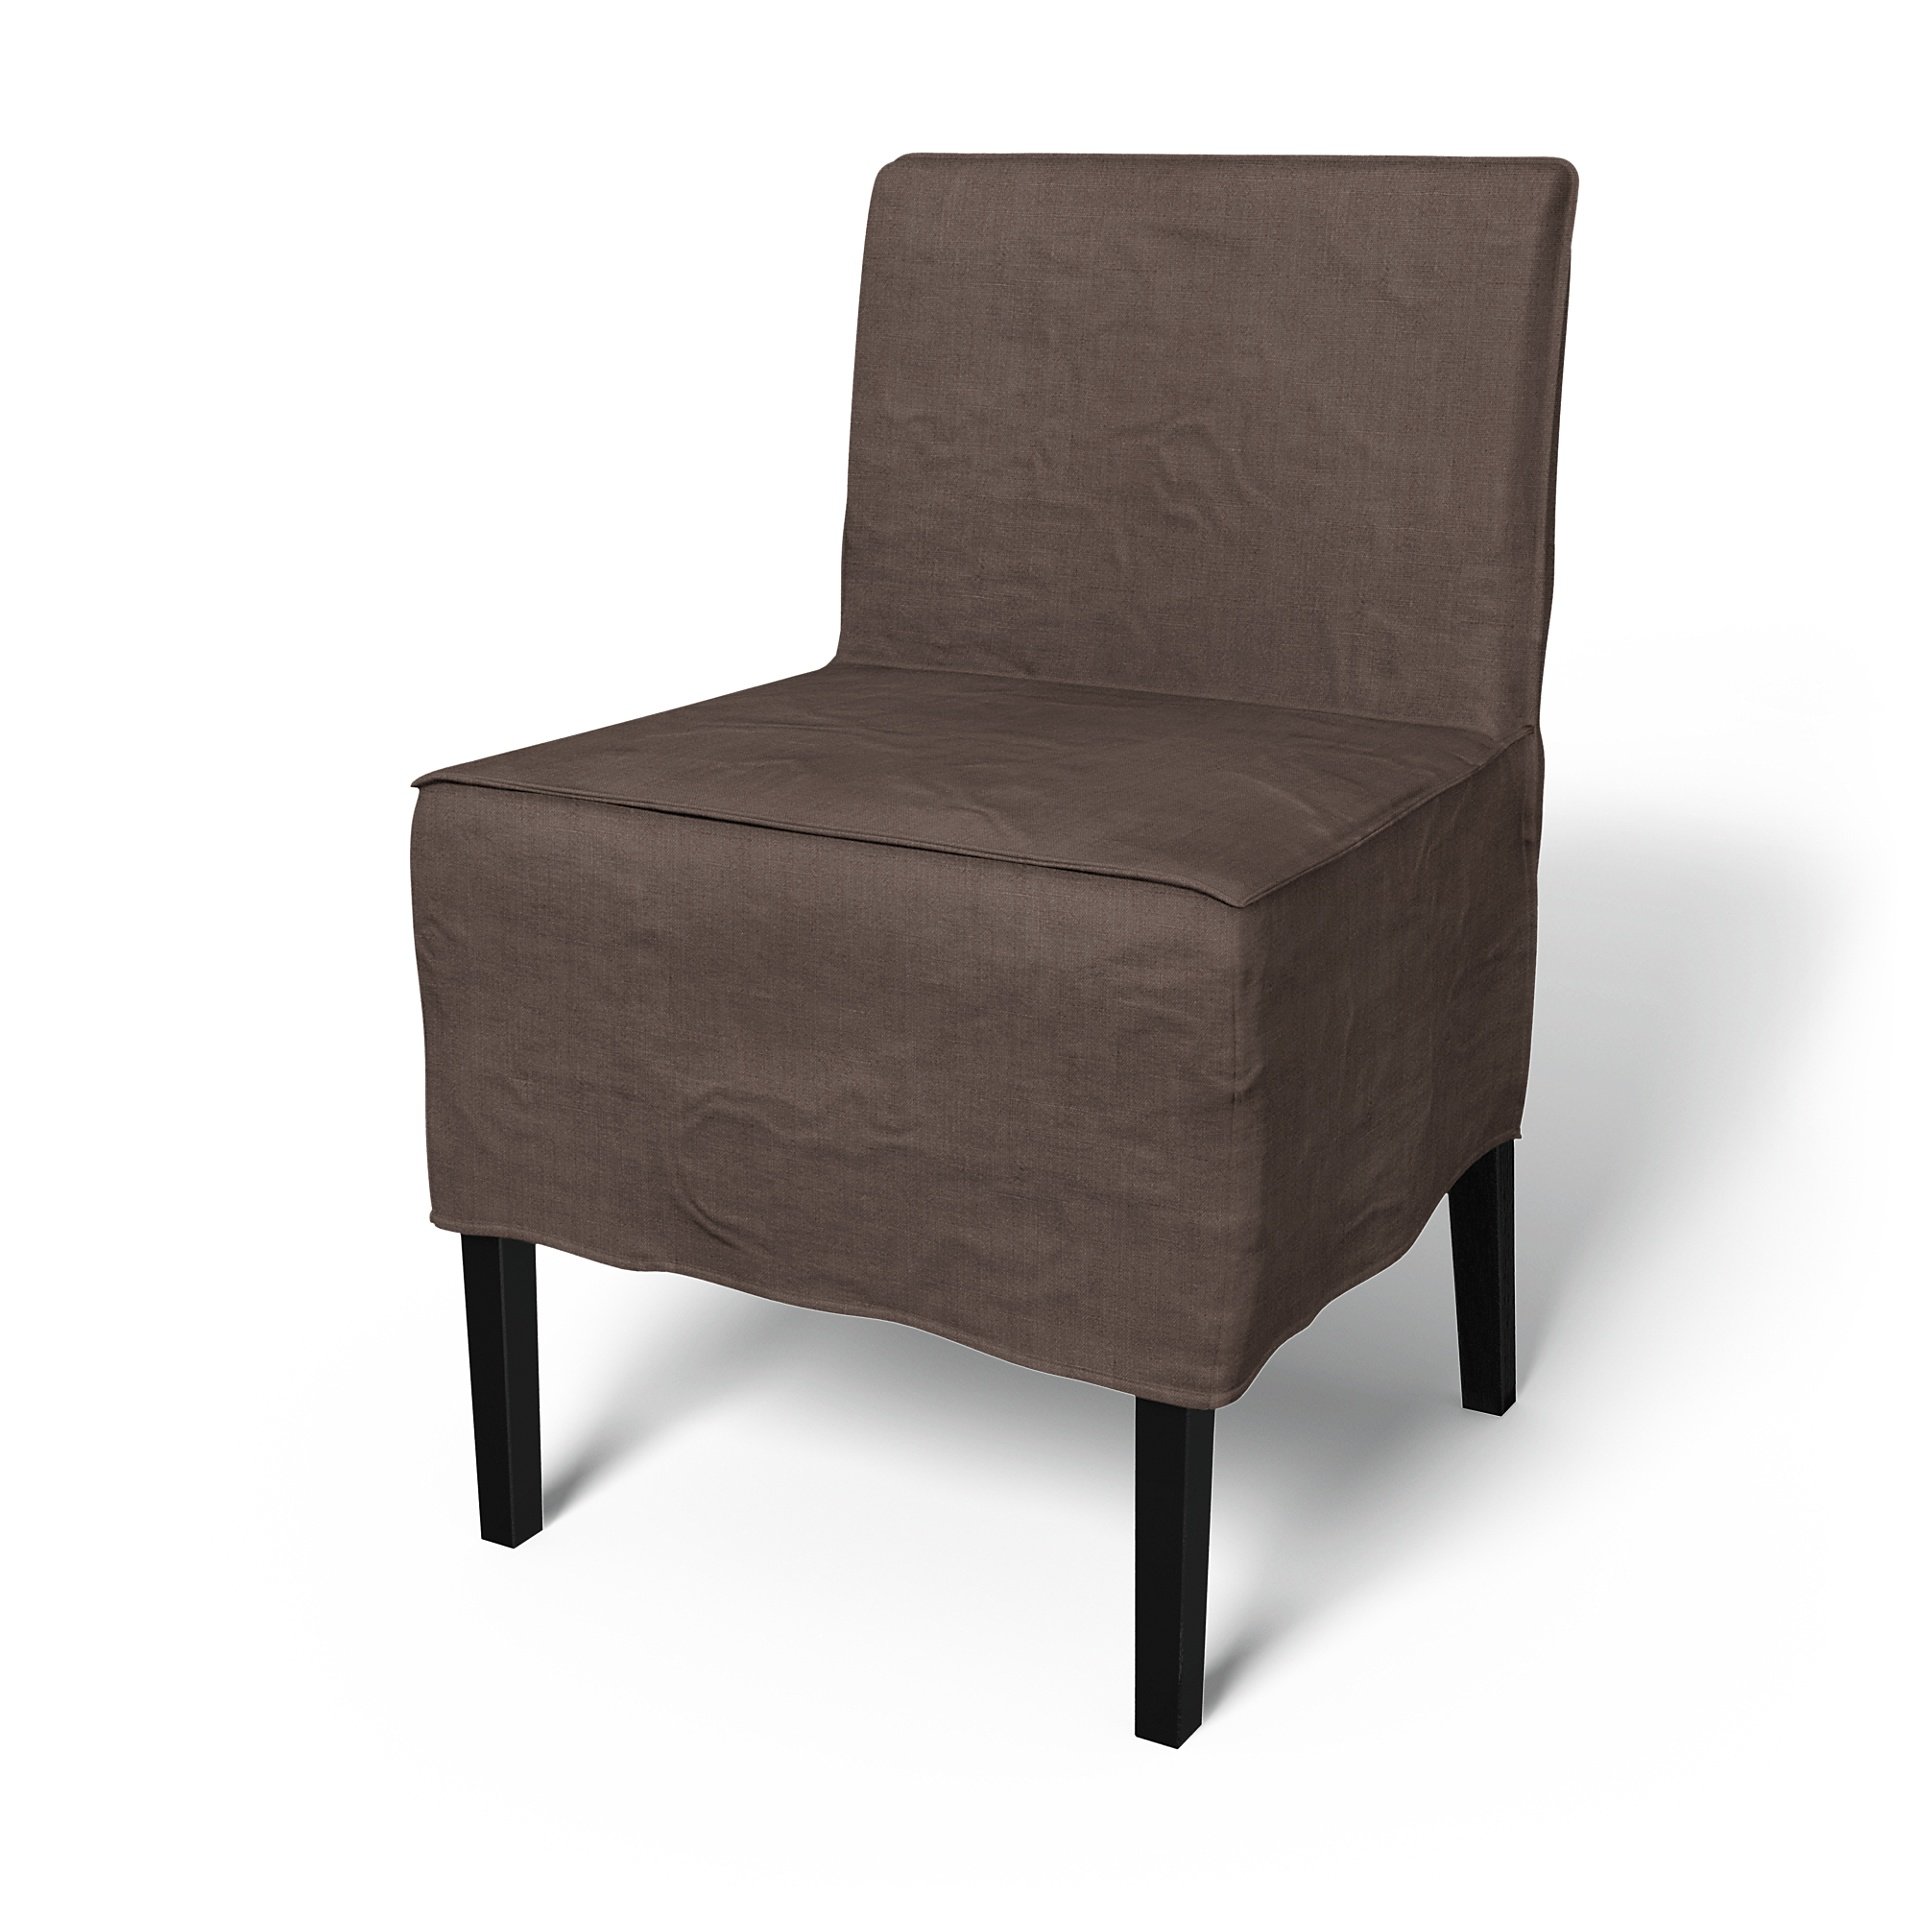 IKEA - Nils Dining Chair Cover, Cocoa, Linen - Bemz